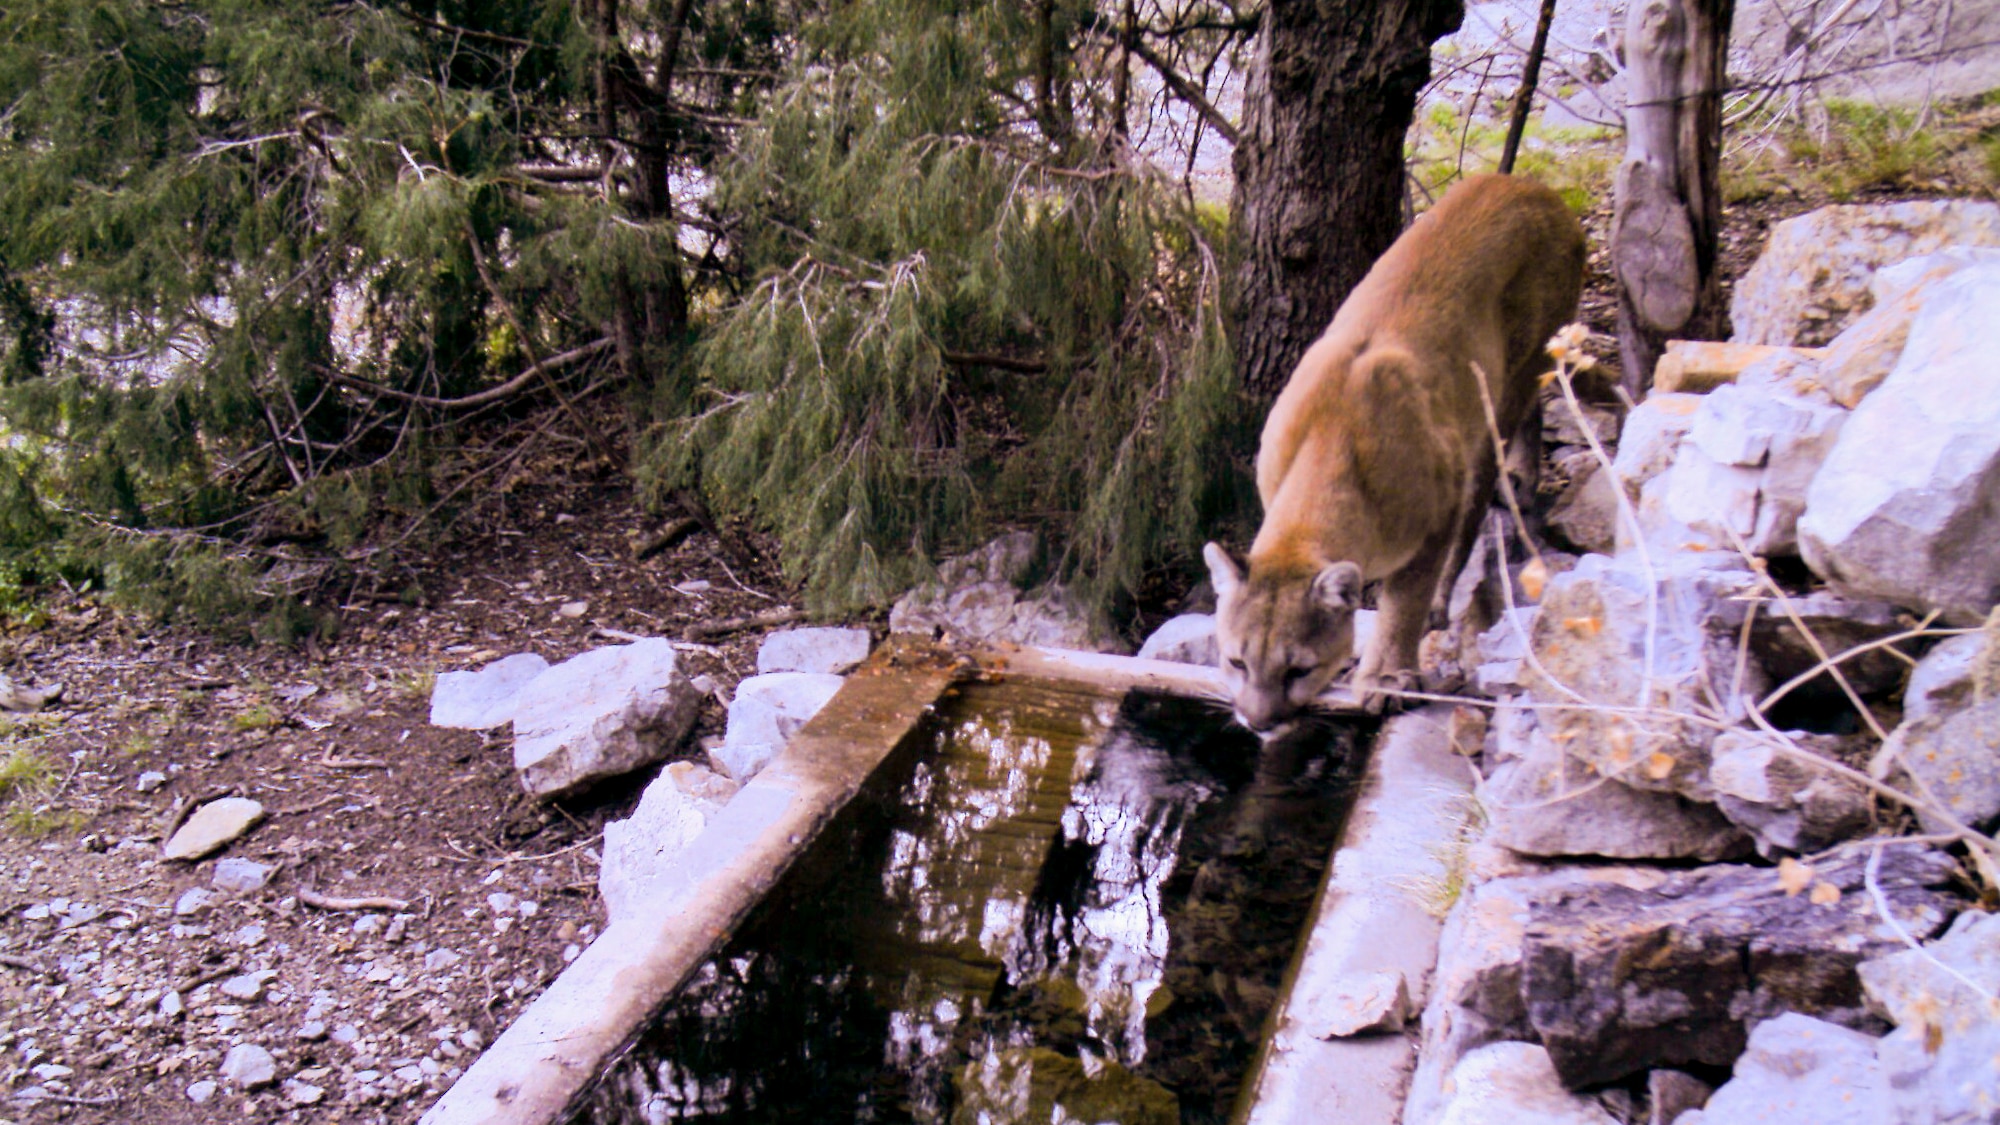 Mountain lion drinks water from a trough